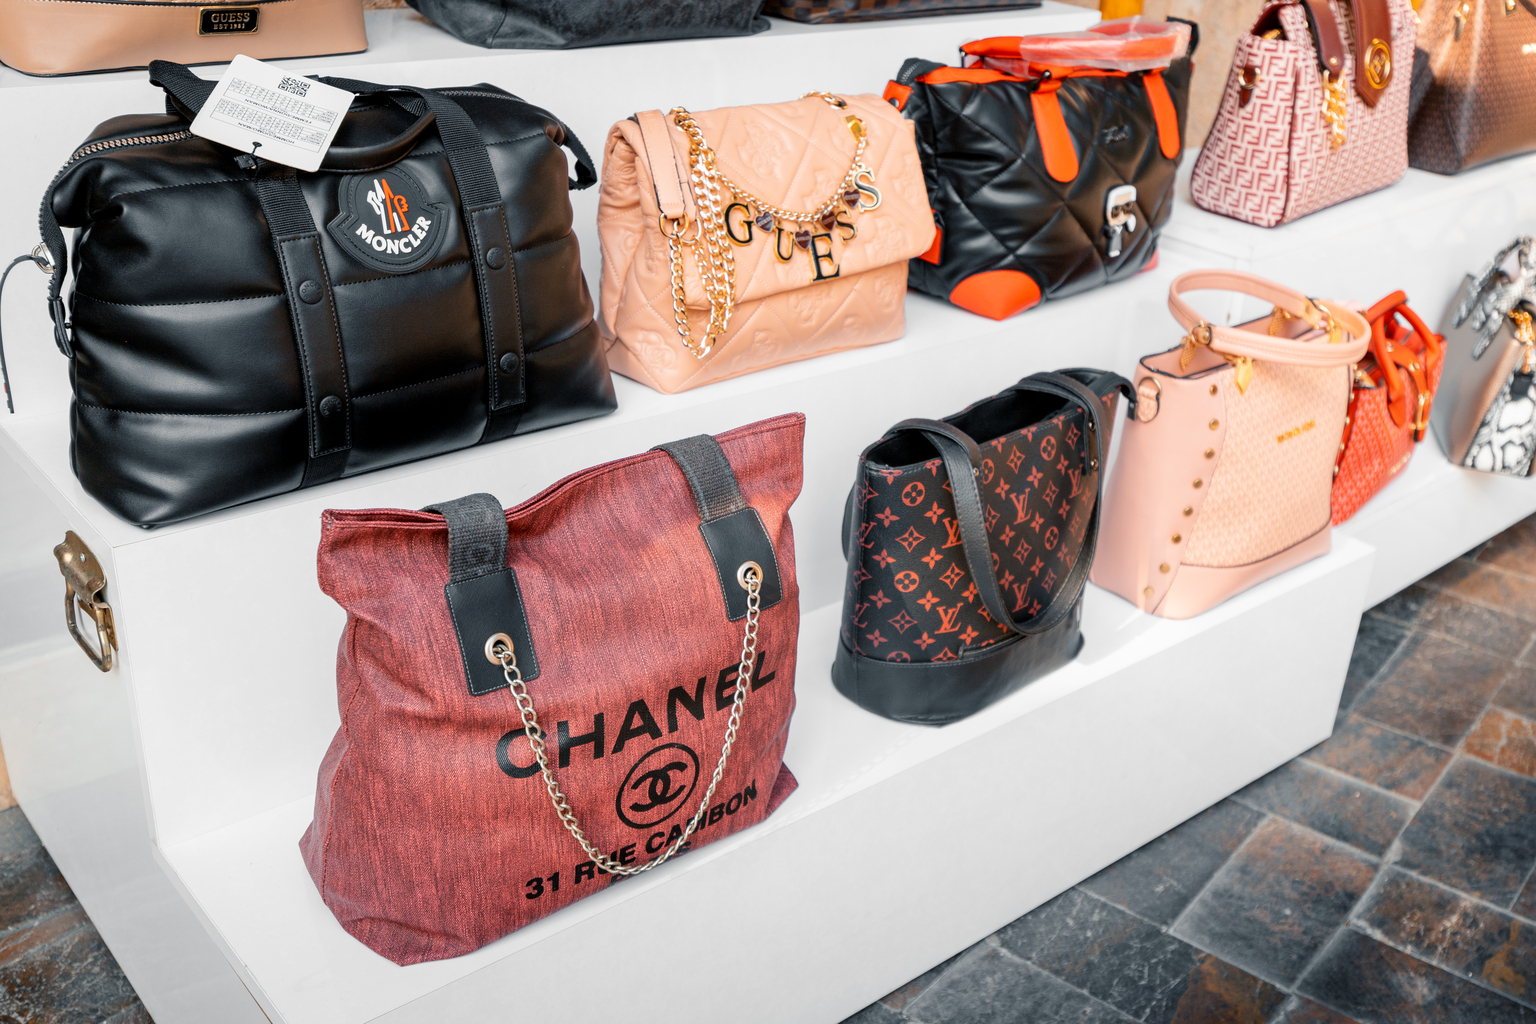 Sold out leather bags suggest Louis Vuitton turnaround pays off